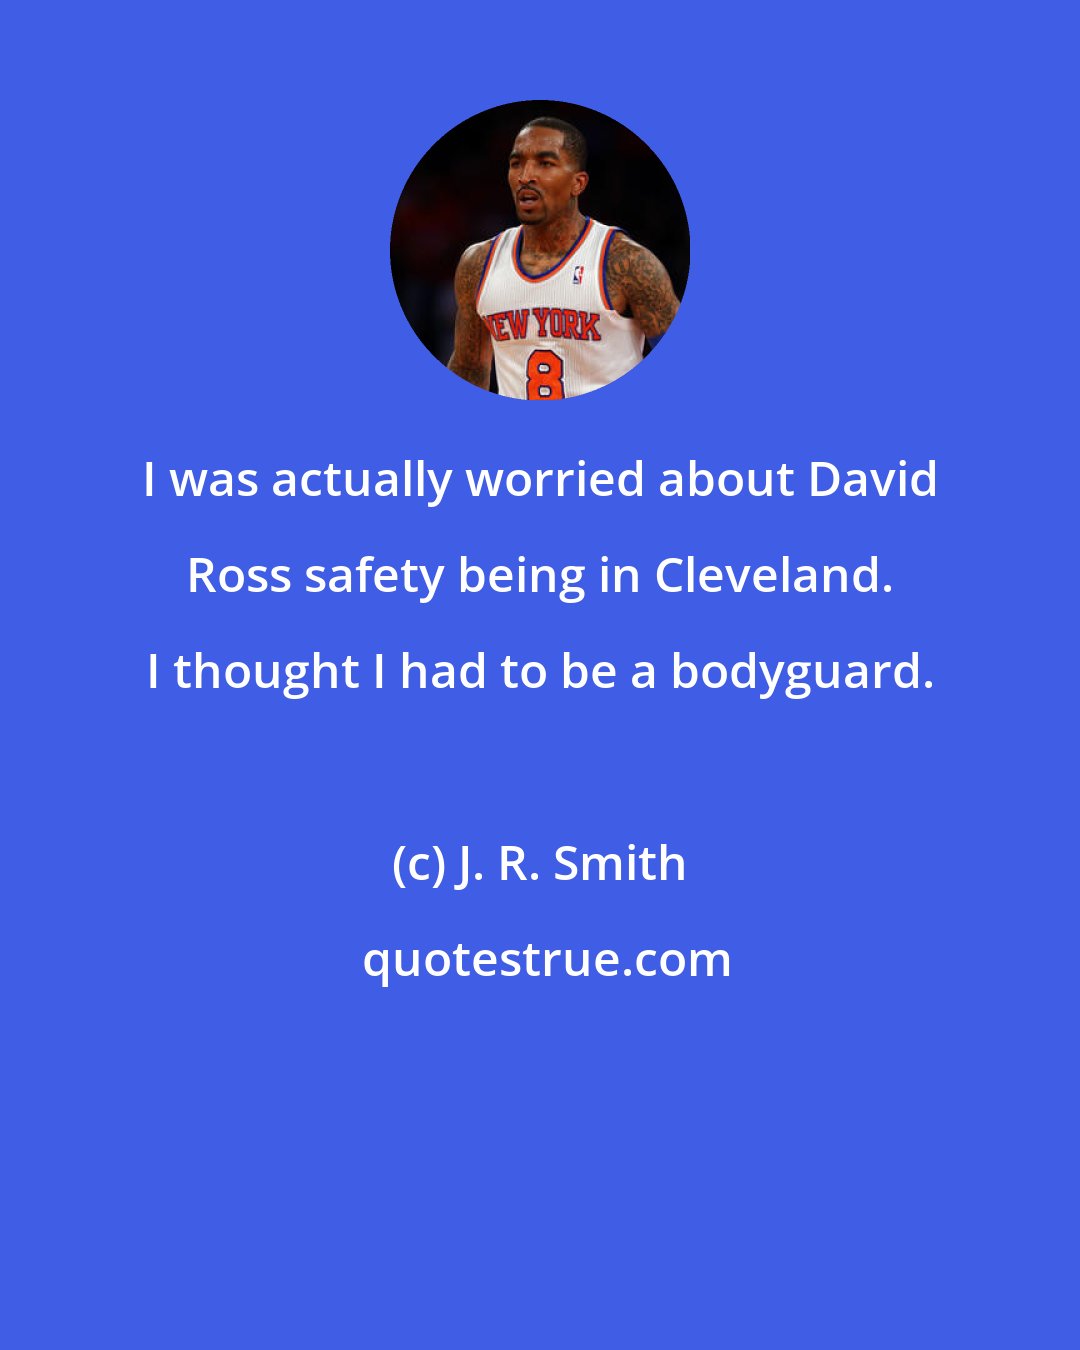 J. R. Smith: I was actually worried about David Ross safety being in Cleveland. I thought I had to be a bodyguard.